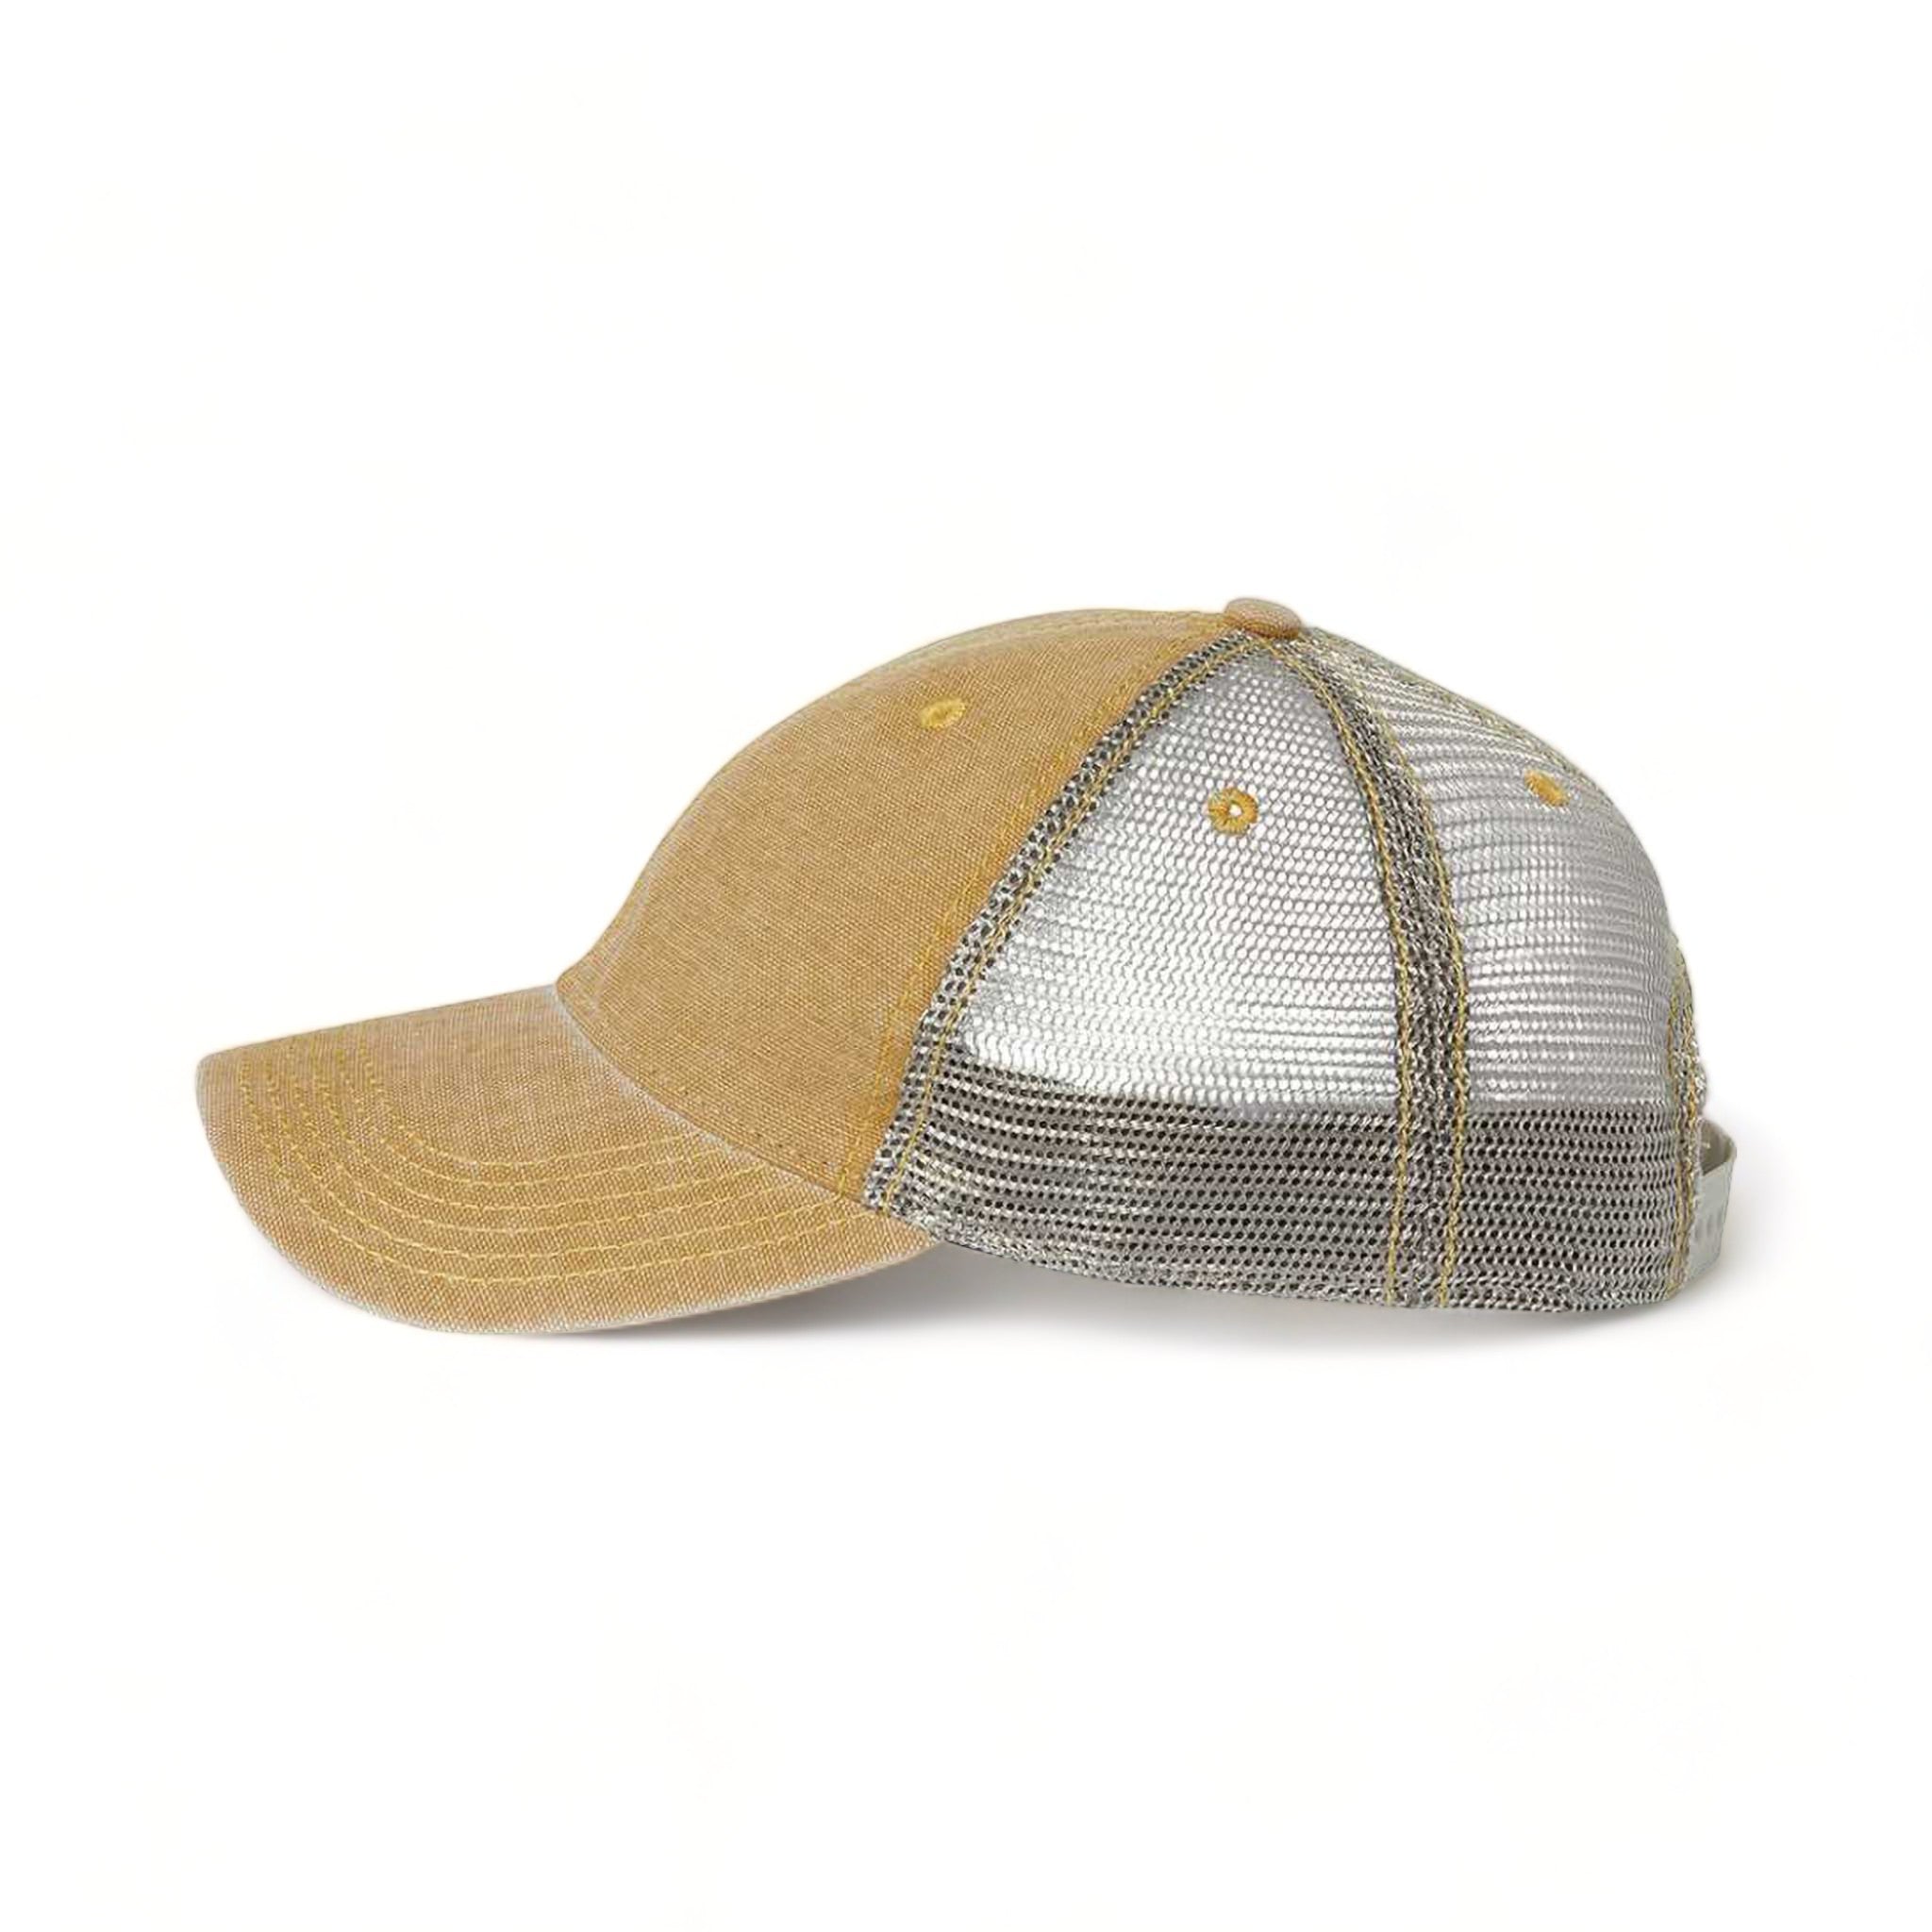 Side view of LEGACY DTA custom hat in khaki and grey